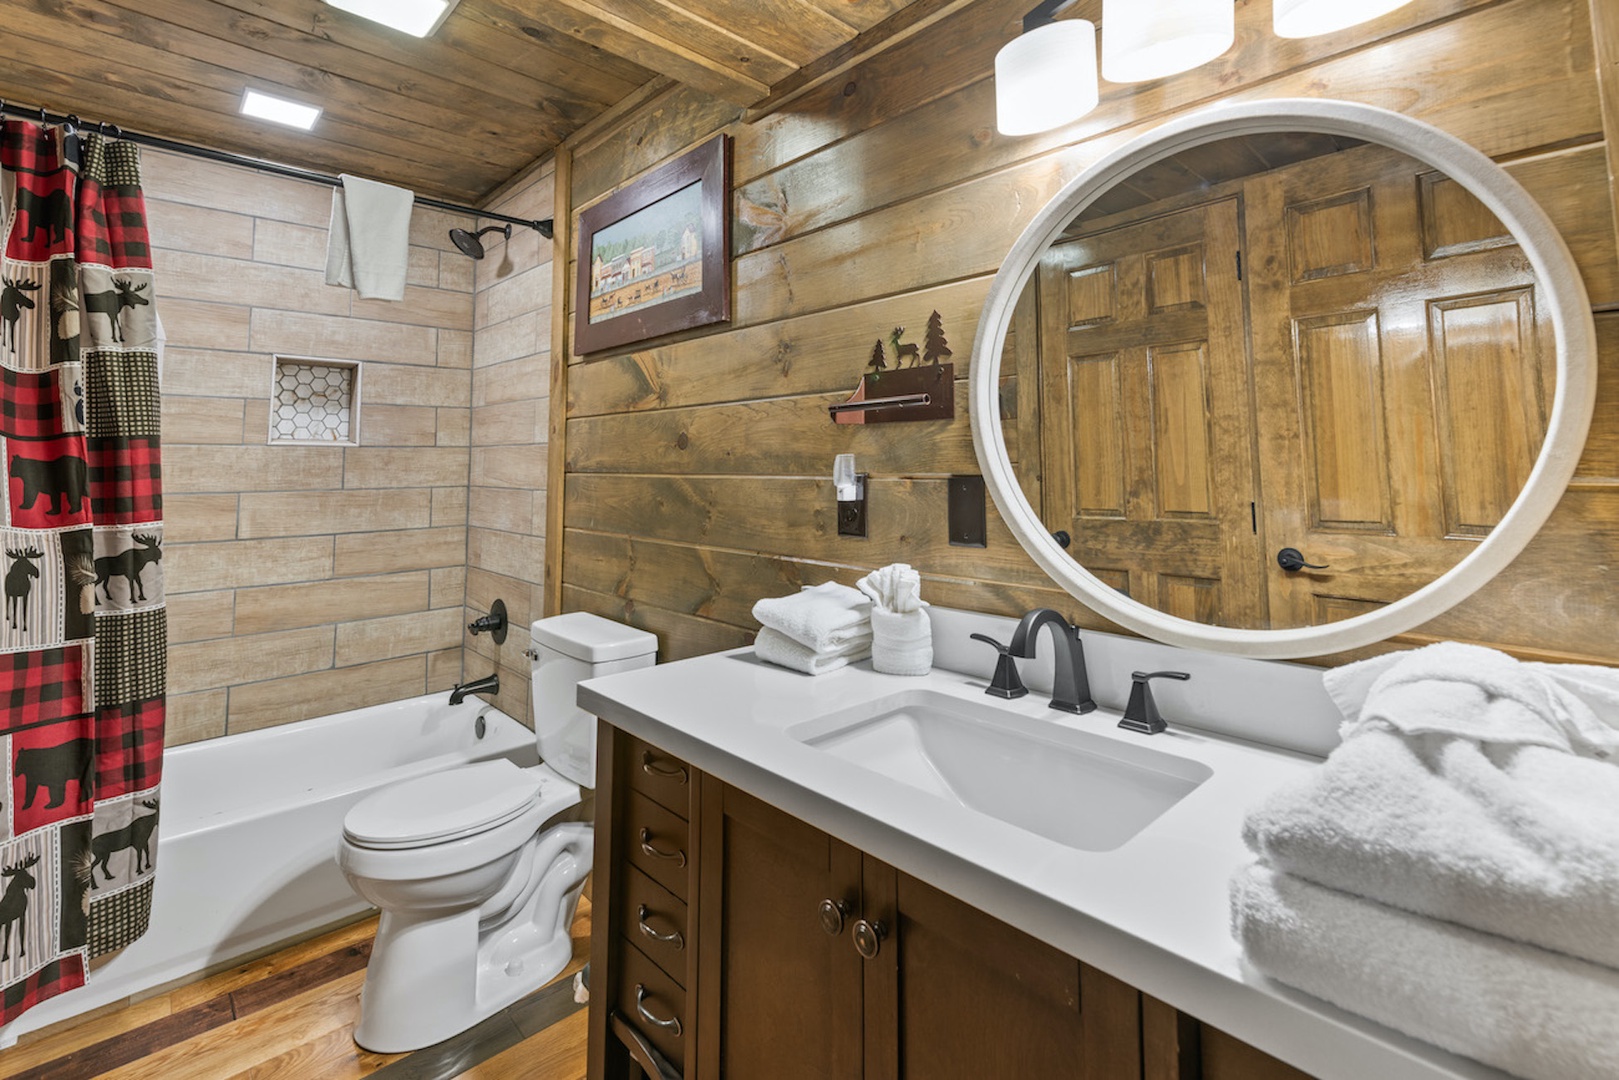 This second-floor full bath offers a single vanity & shower/tub combo